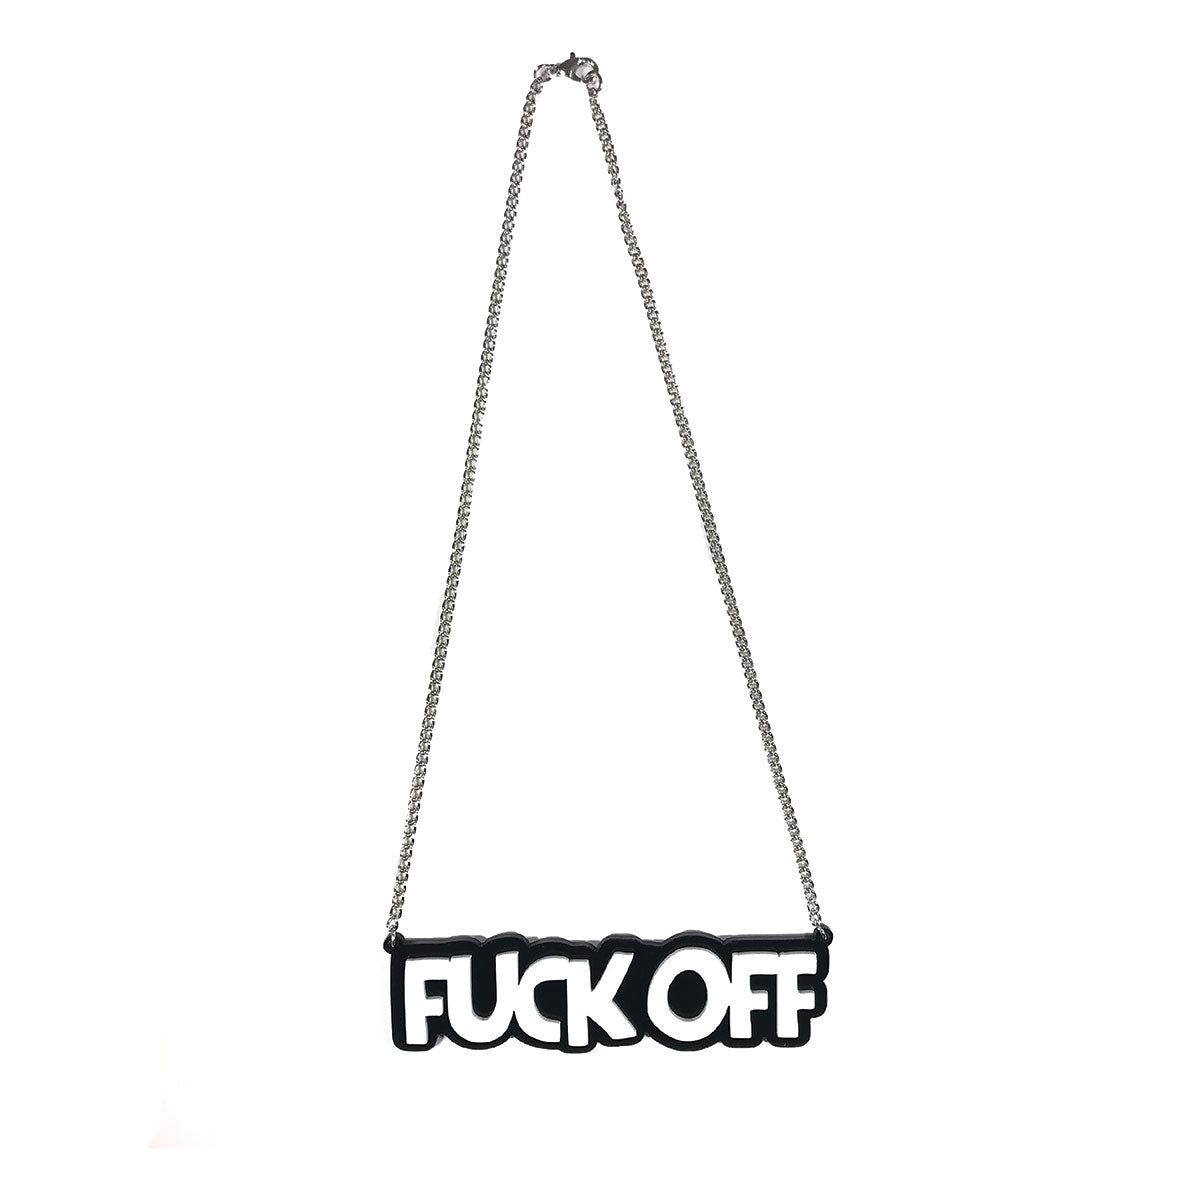 Geeky & Kinky Fuck Off Necklace